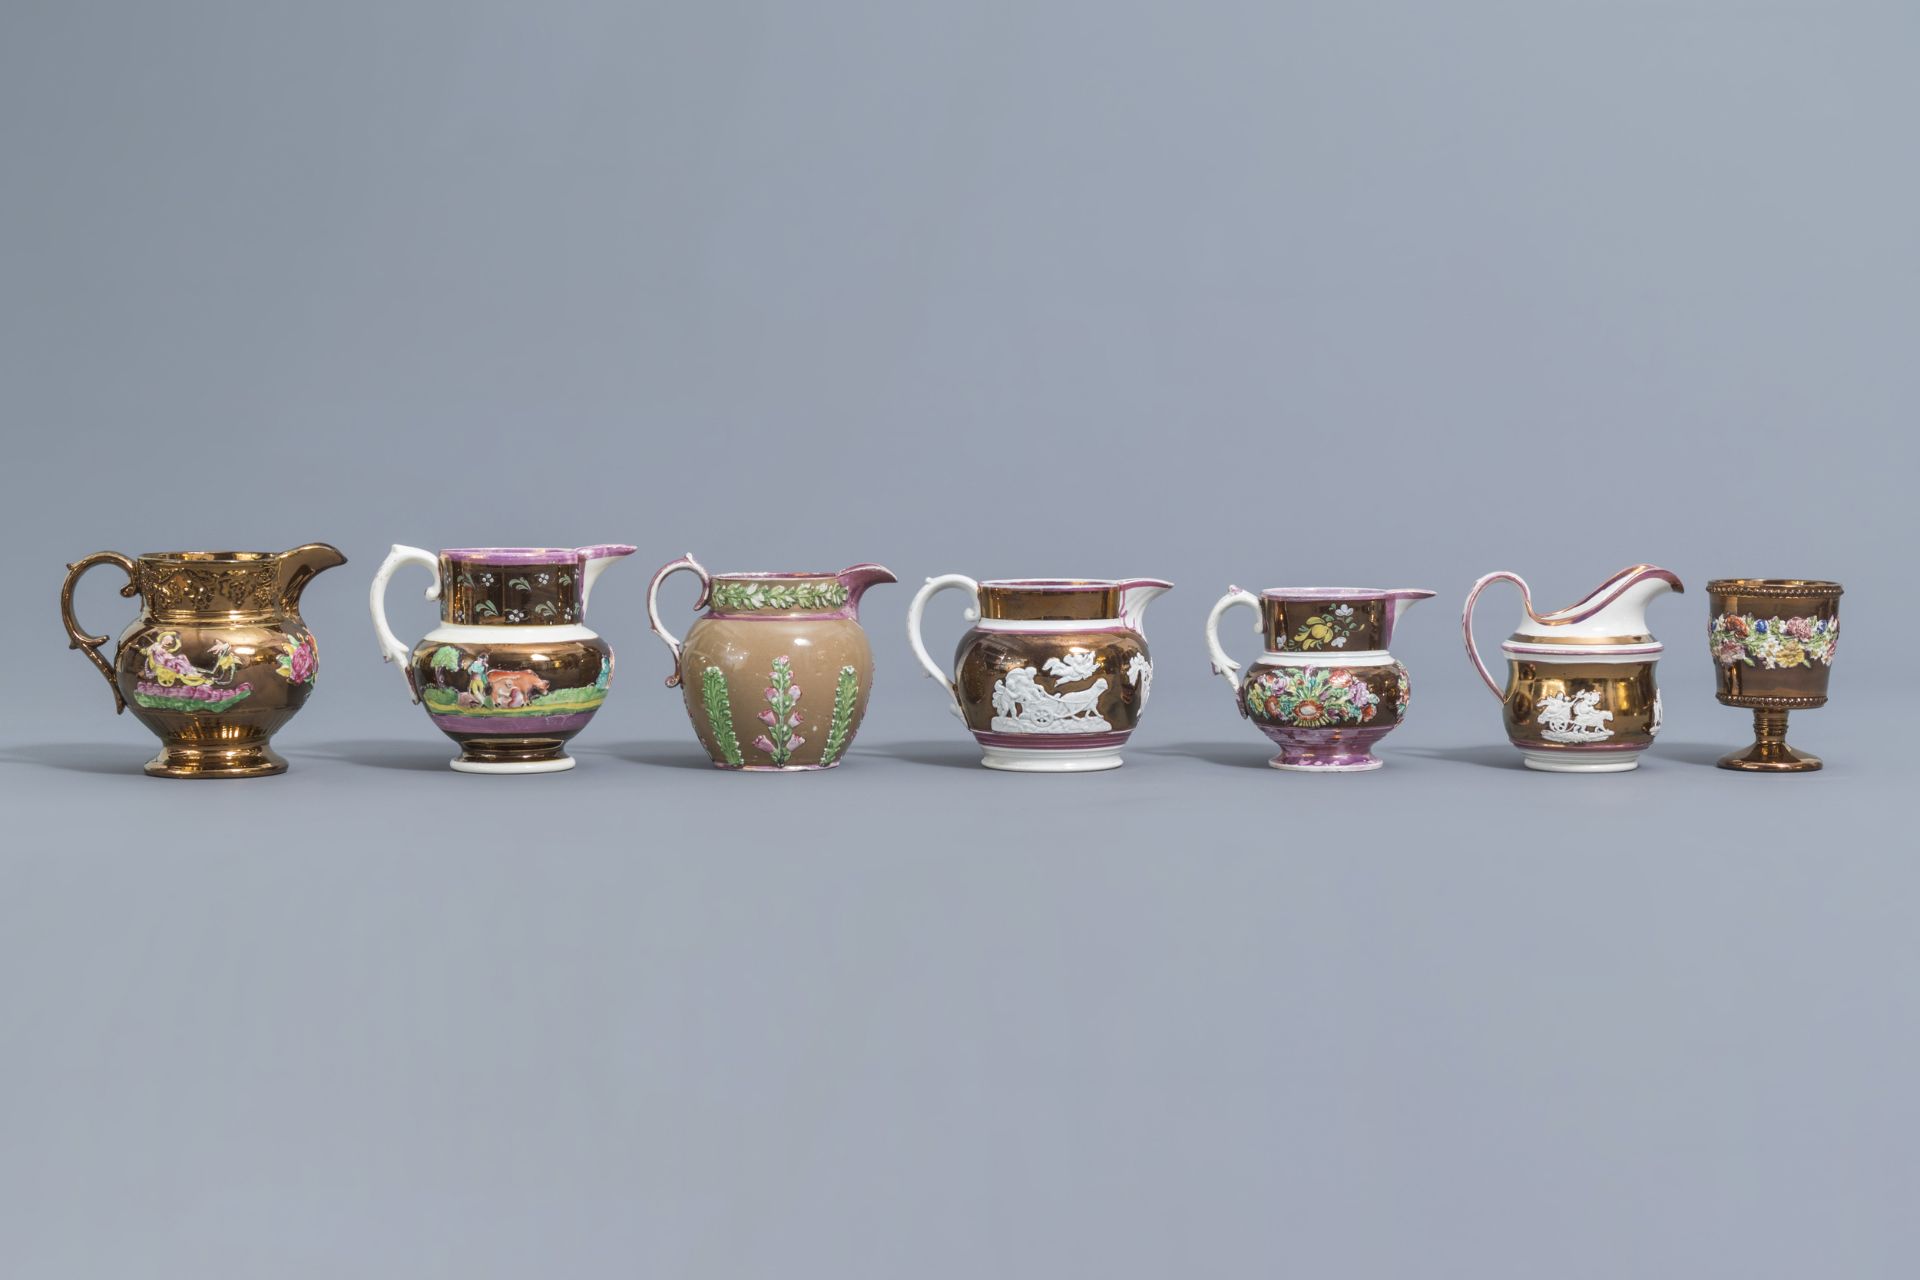 A varied collection of English lustreware items with relief design, 19th C. - Image 27 of 50